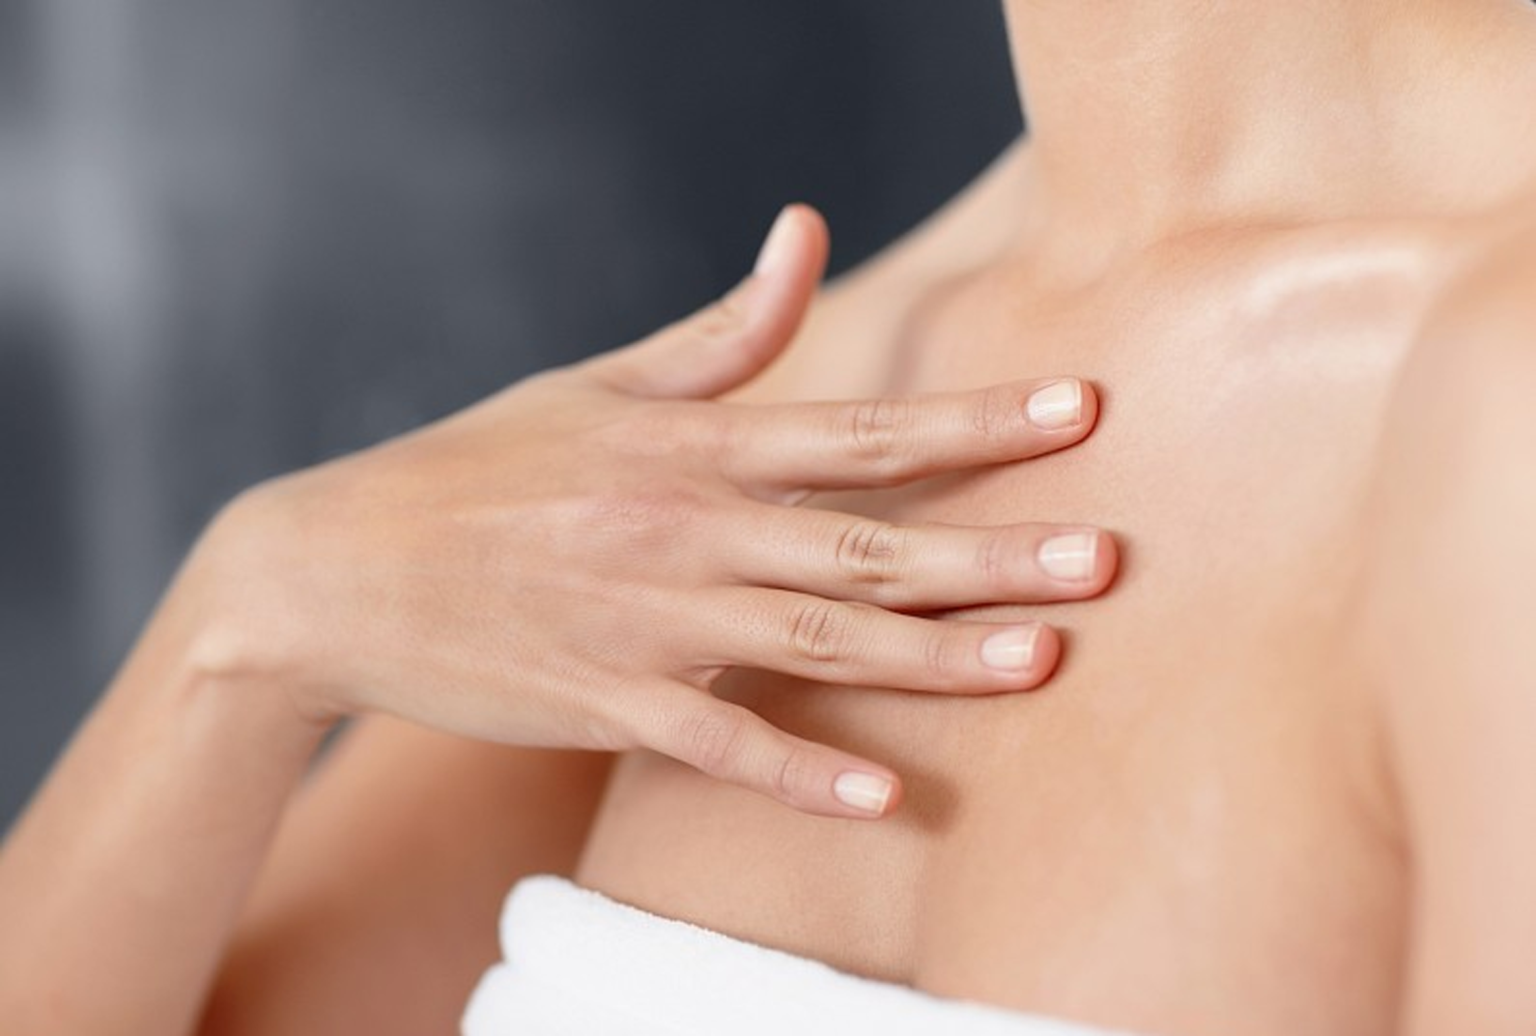 What is a decollete massage?